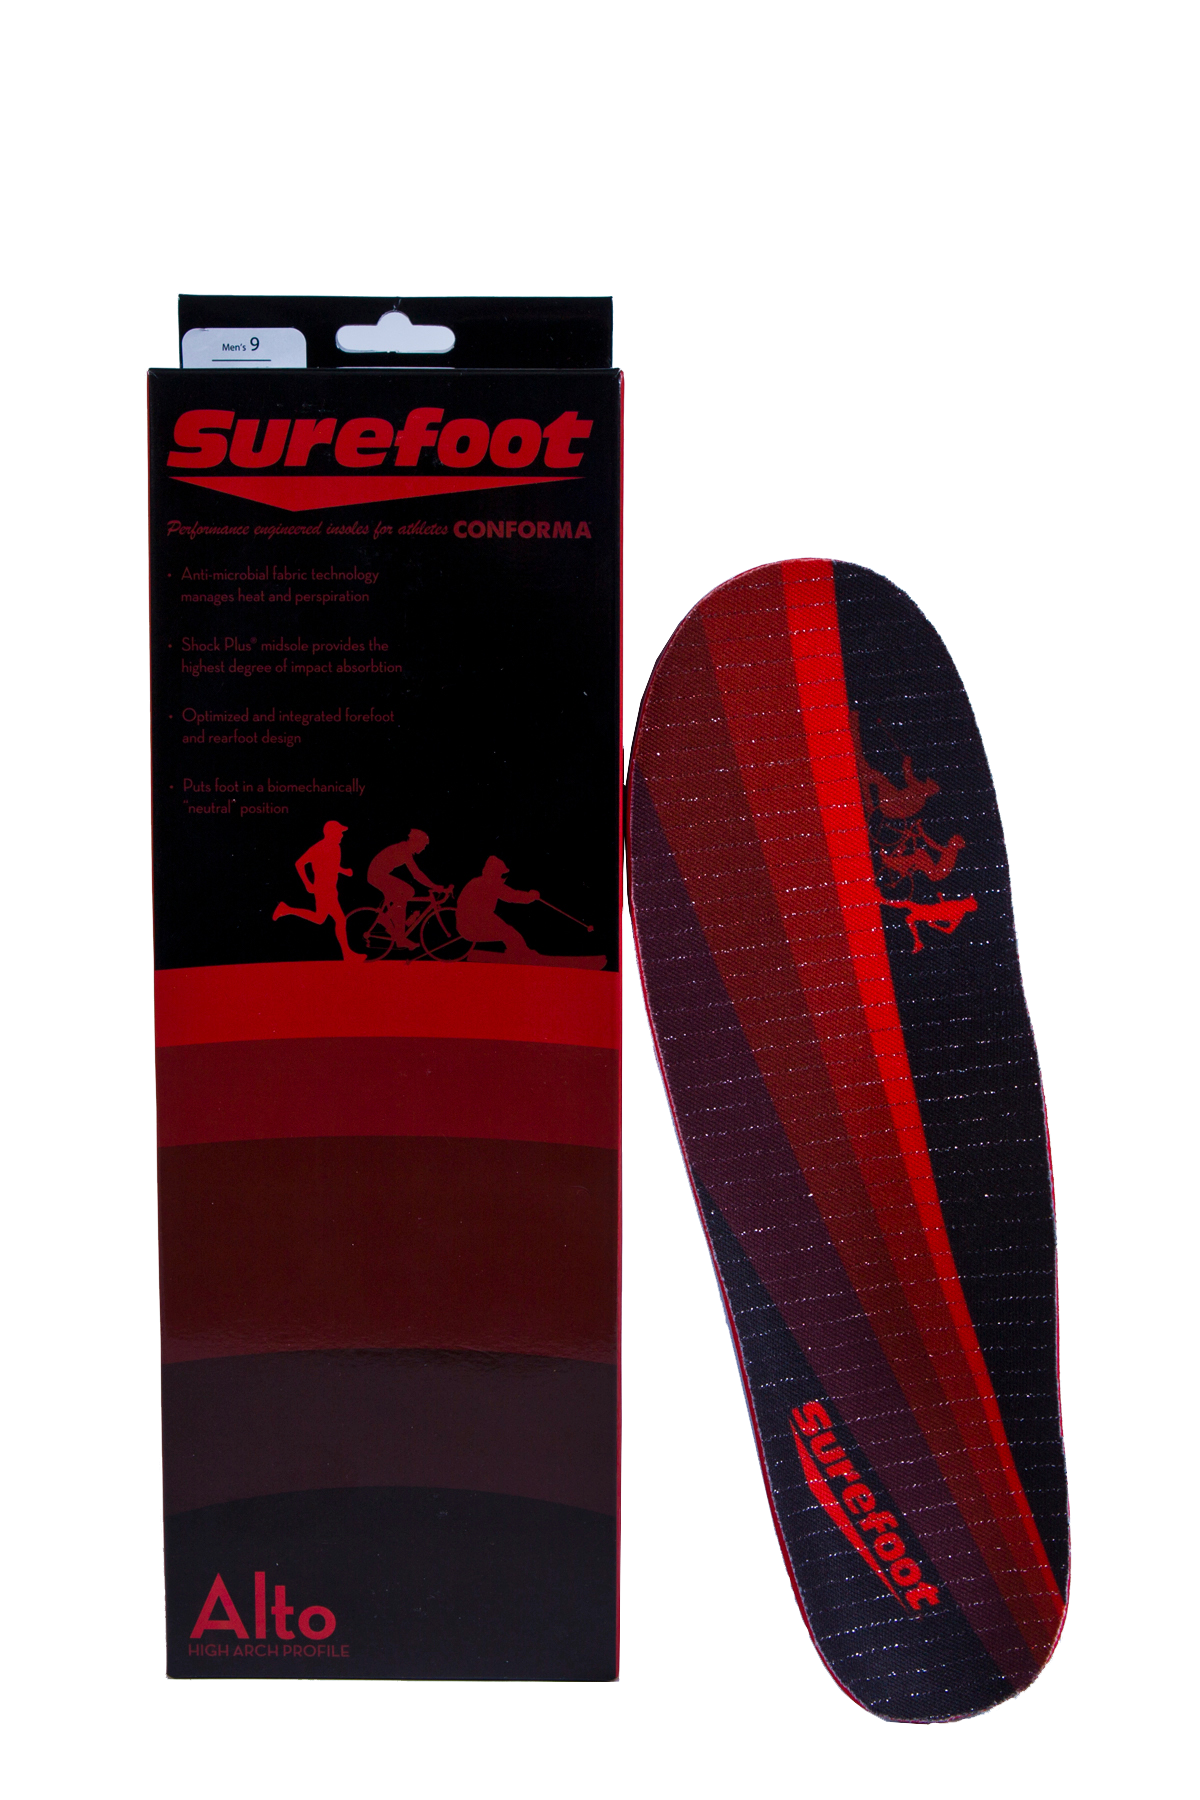 Stock image of the Conforma Alto Insole by Surefoot showing the left insole and it's box in black and red